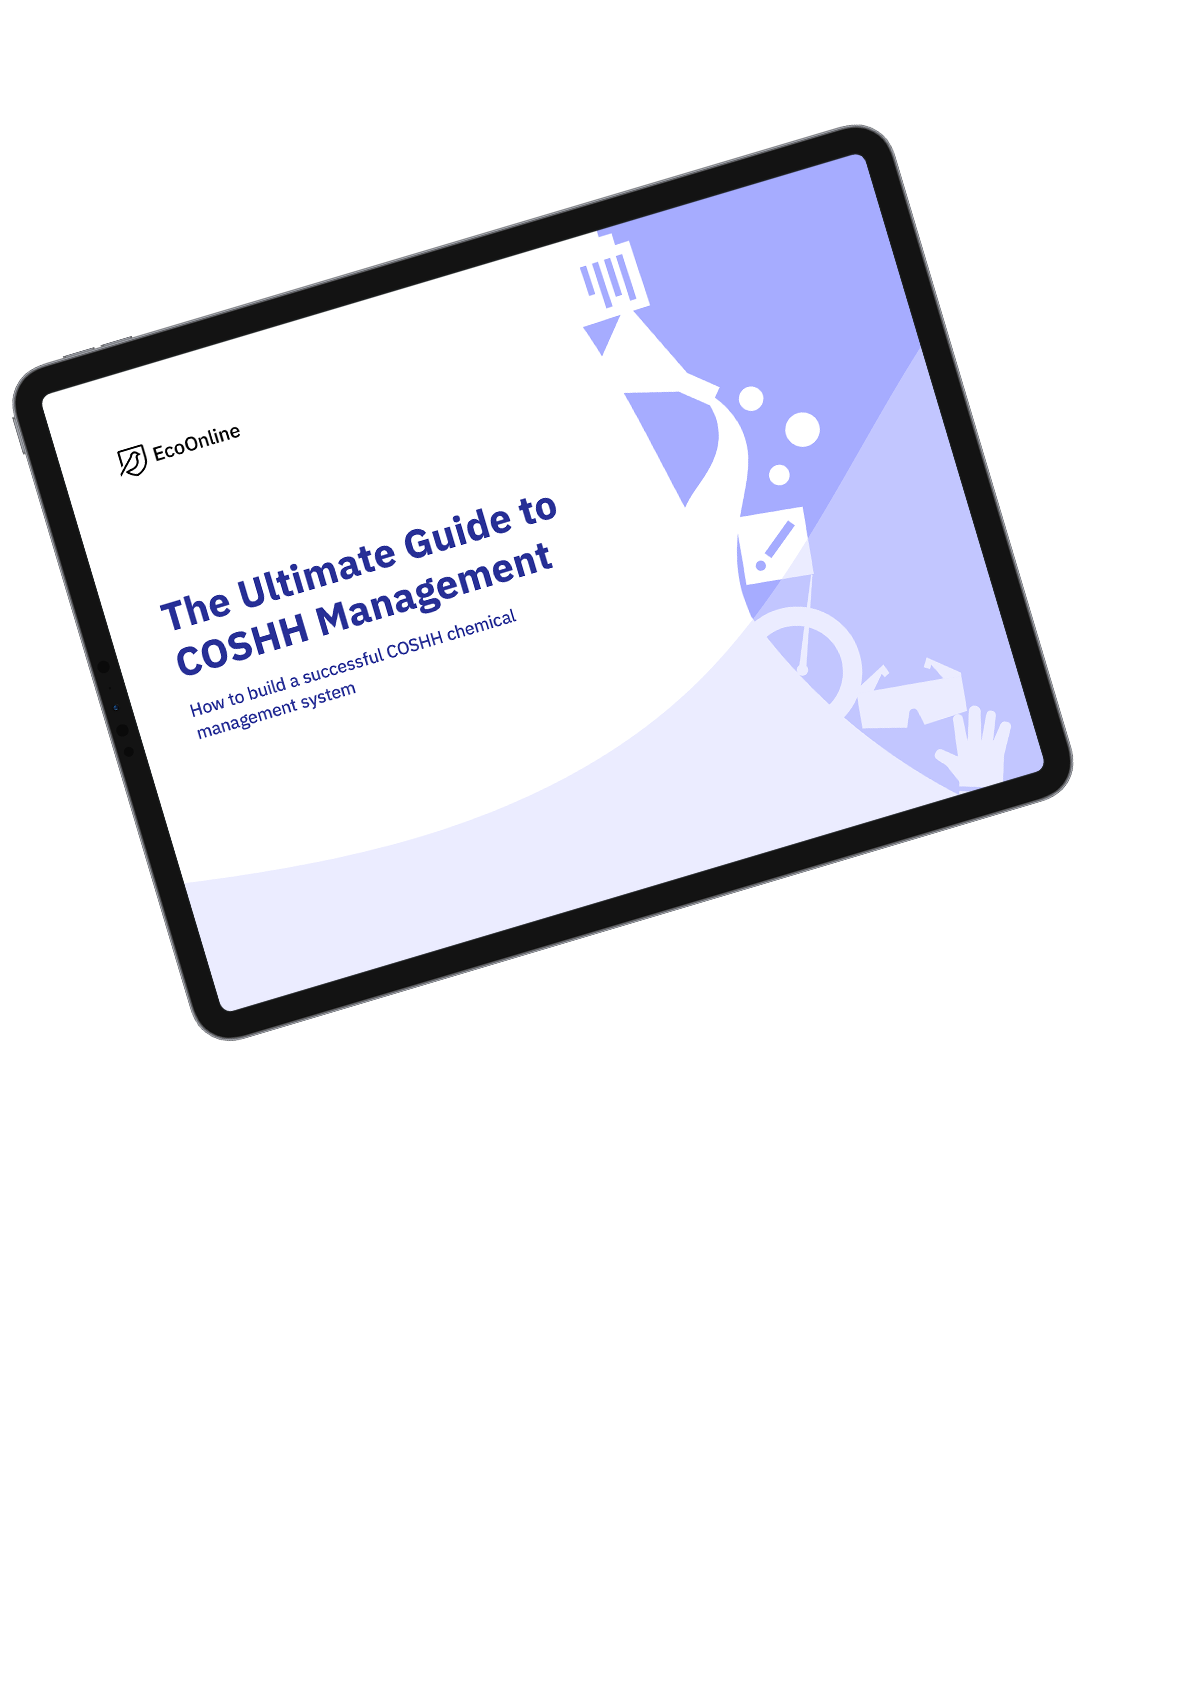 The-ultimate-guide-to-coshh-management-cover